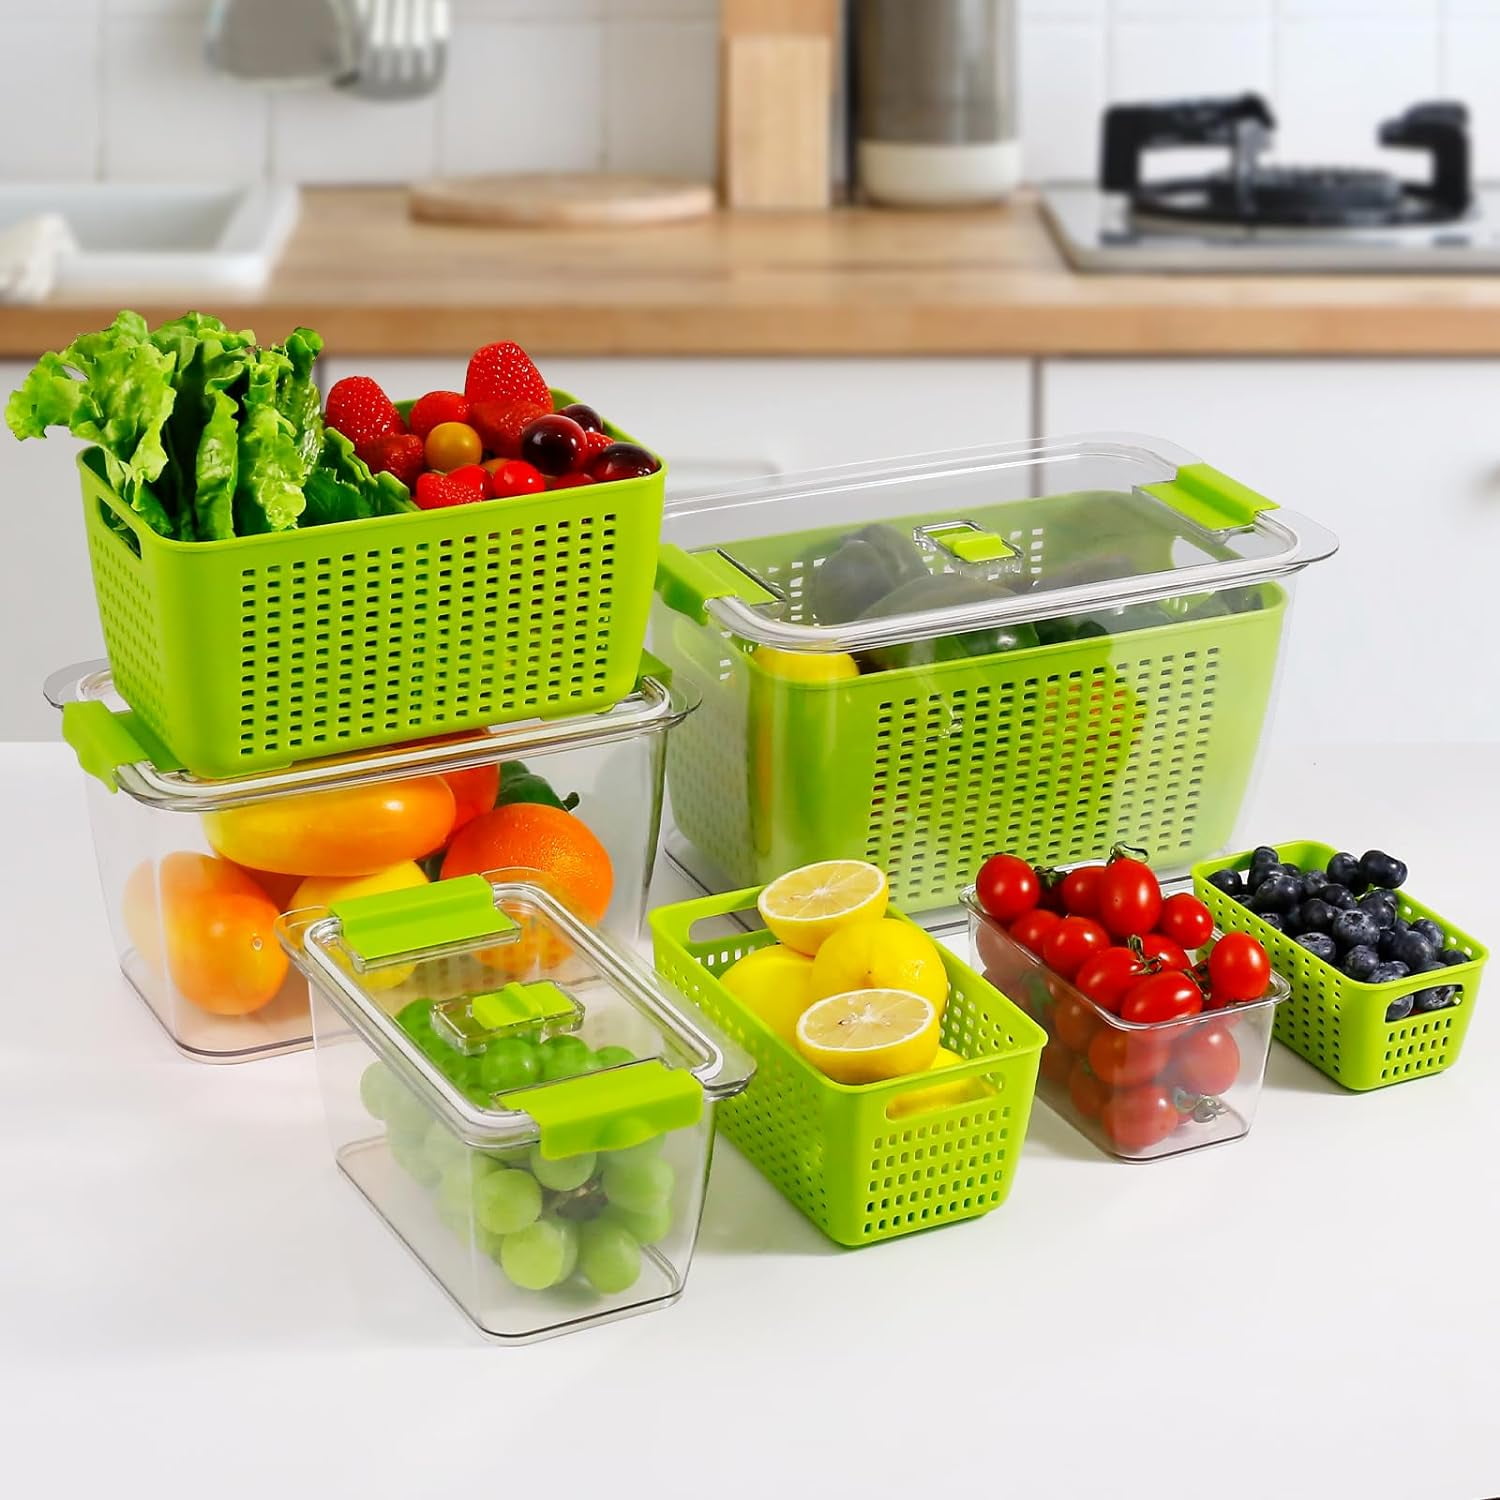 32-pc Deluxe Set Botto: The Adjustable Container (Clear+Blocks UV), Free  Shipping